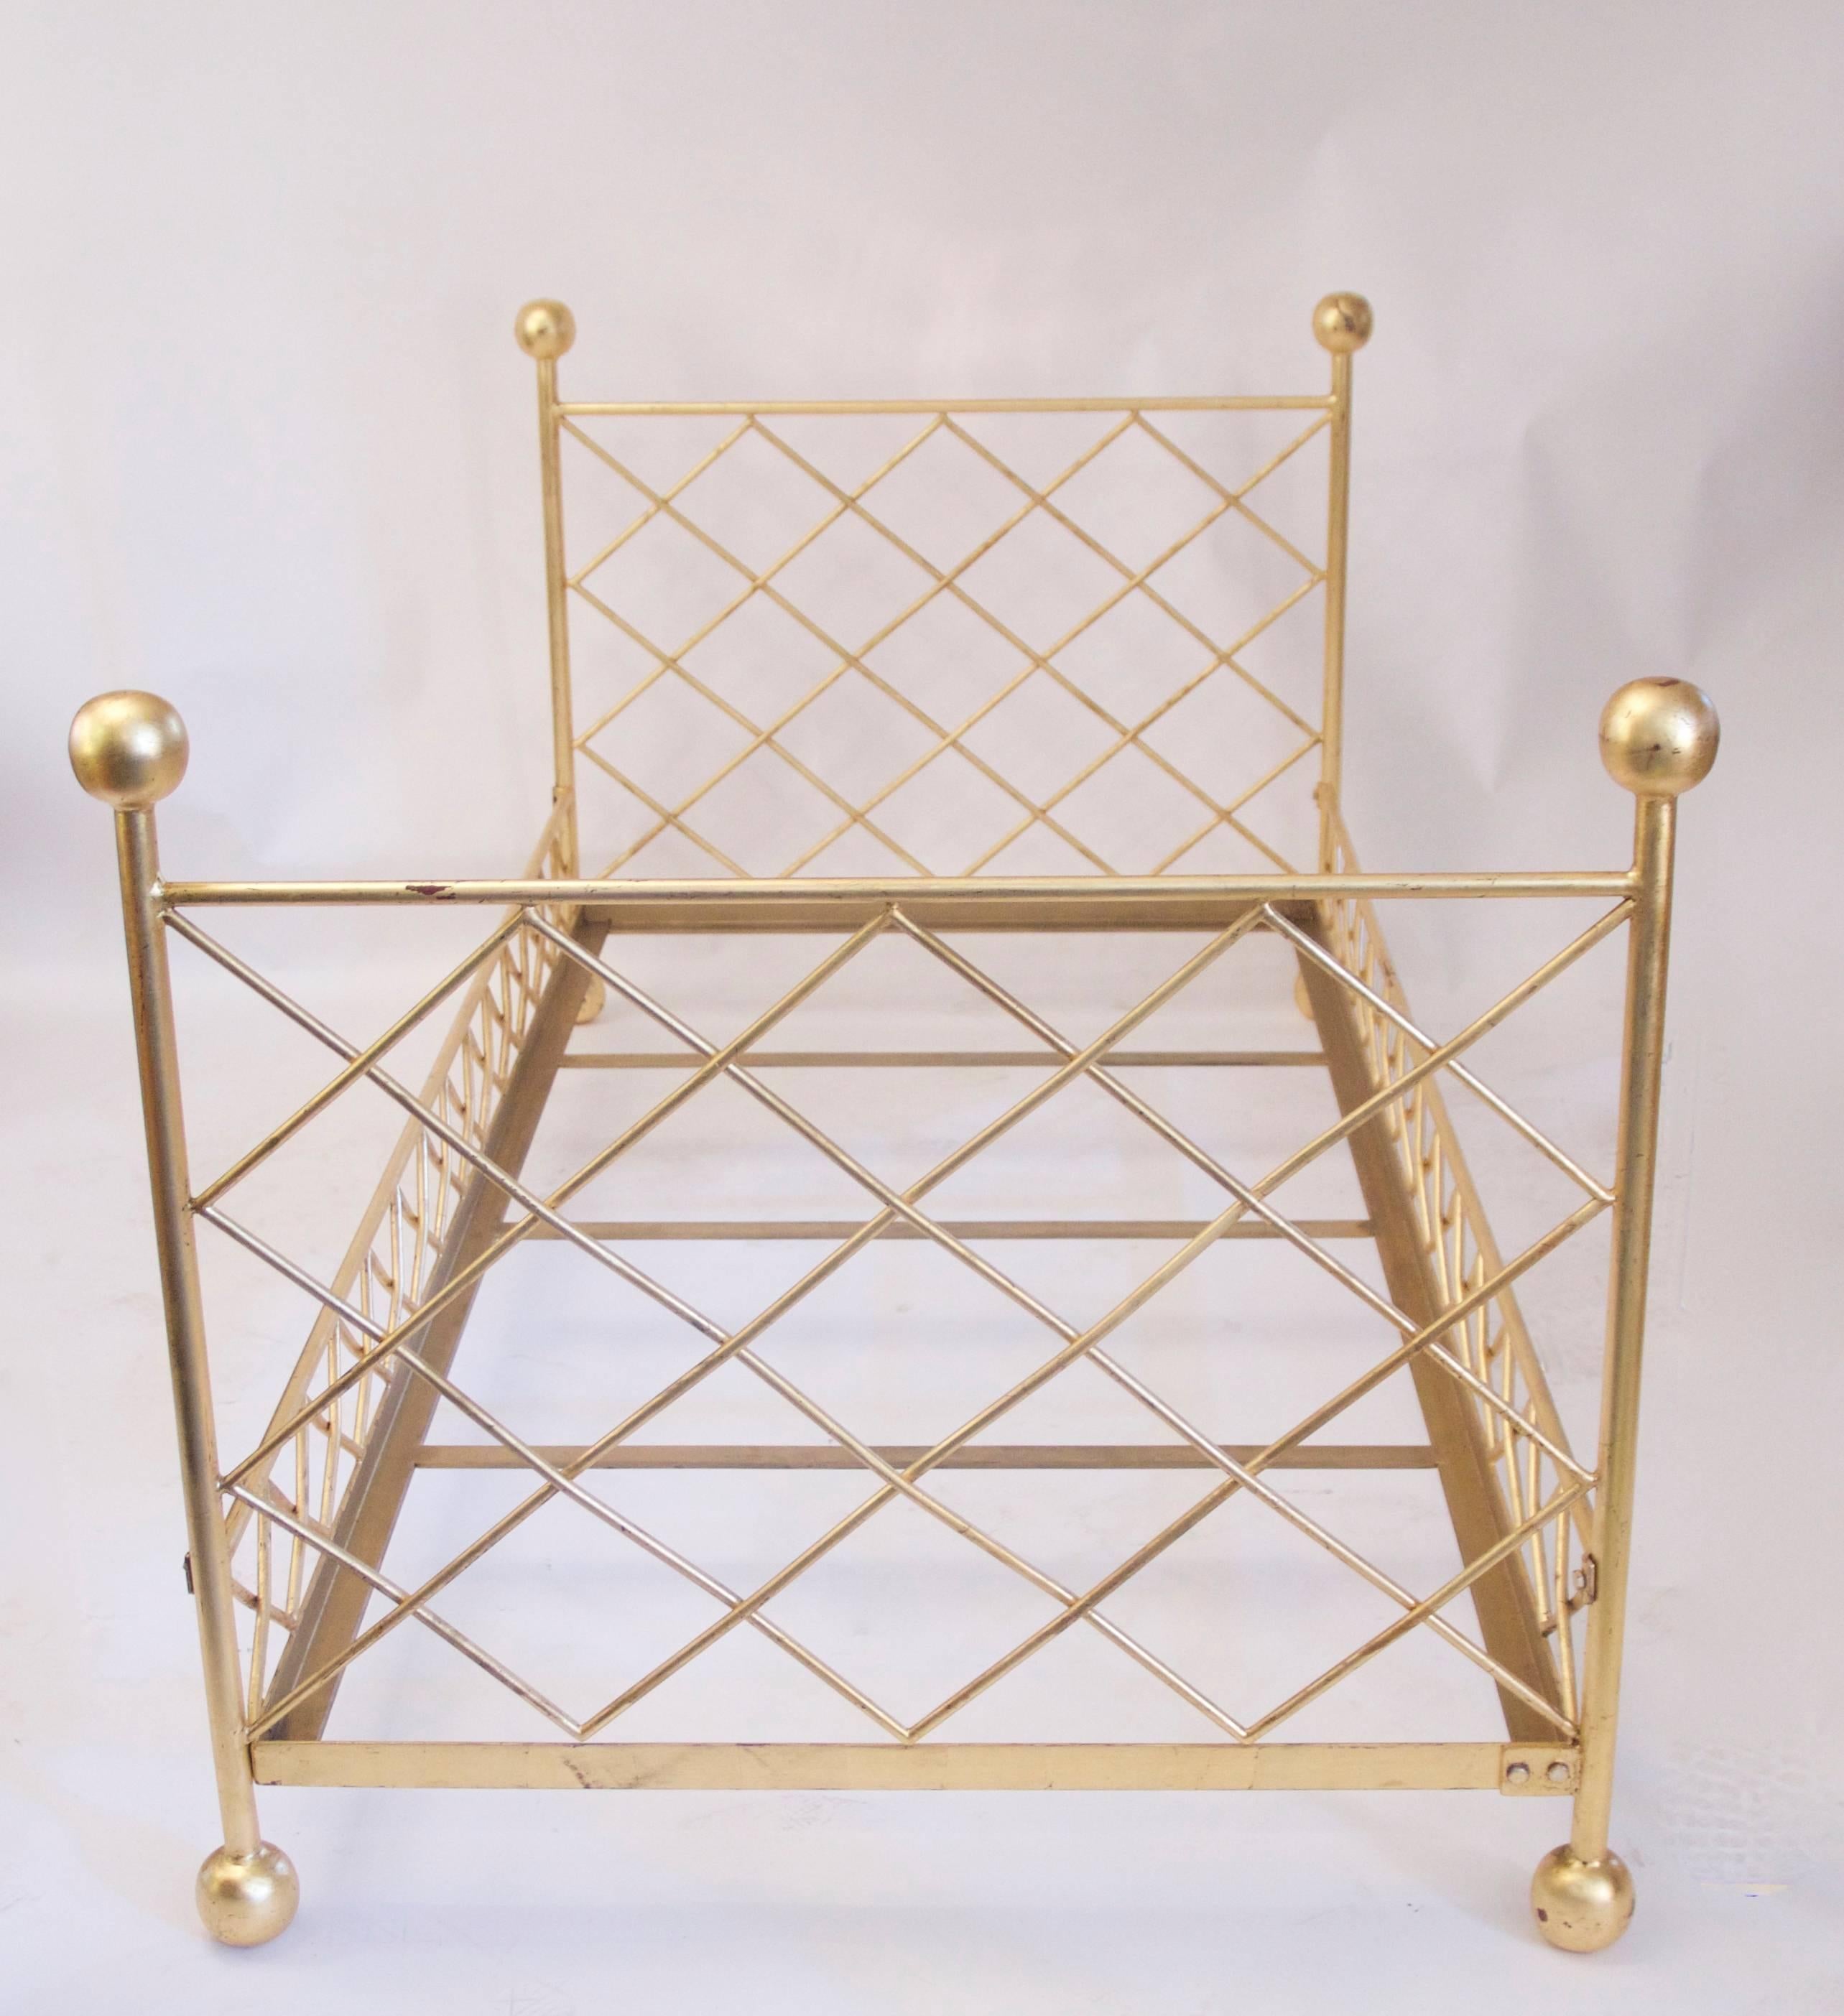 Bed,
Gilded metal with braces,
circa 2000, France.
Measure: Height 90 cm, width 203 cm, depth 96 cm.